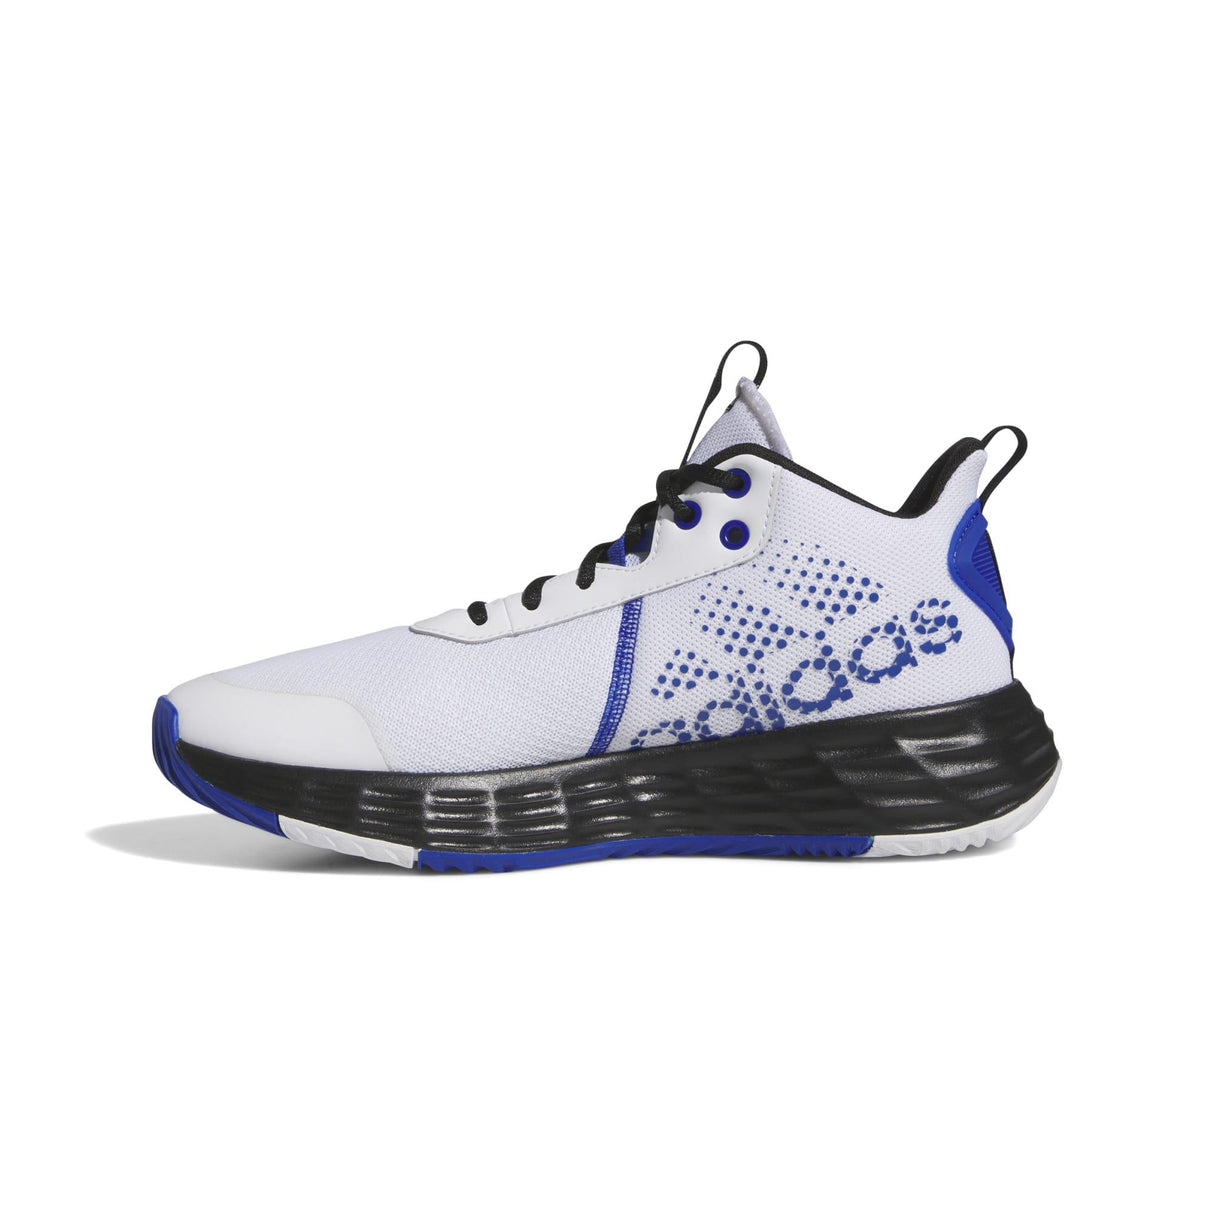 Adidas OwnTheGame 2.0 - Mens Basketball Shoe - Sneakers Plus